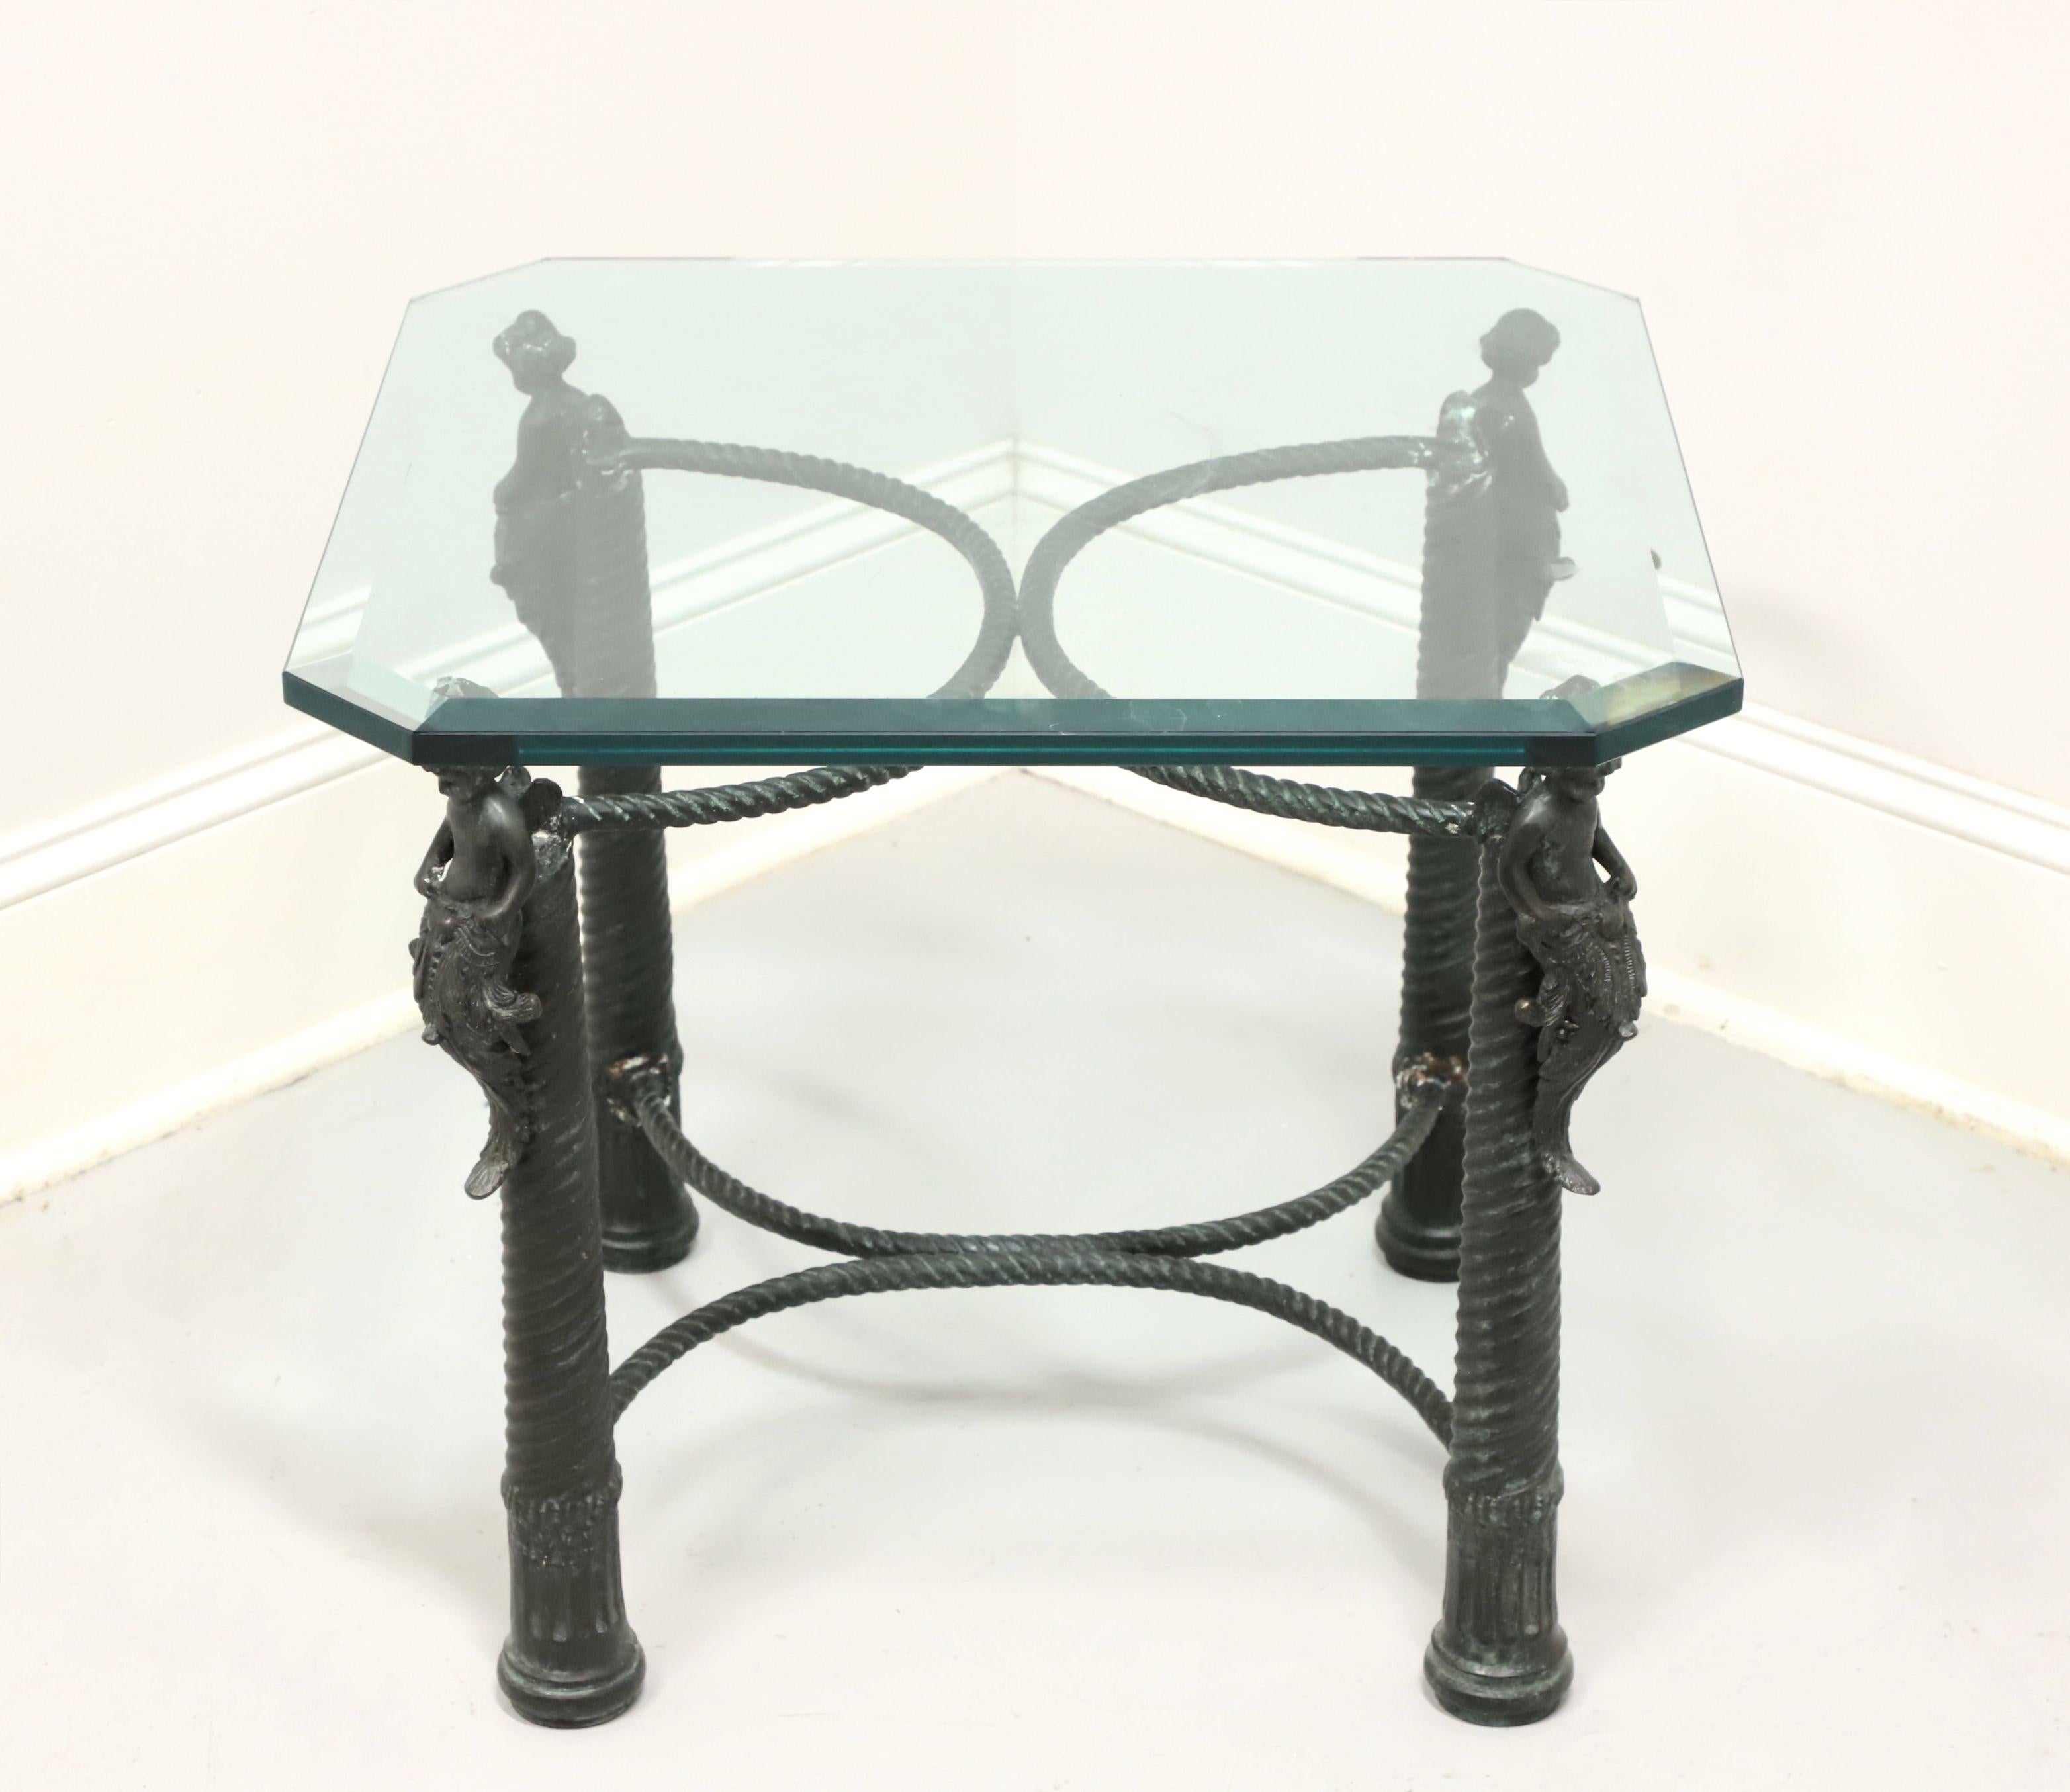 A Nautical inspired mermen cocktail table by Maitland Smith. Solid bronze patinated to a green/blue color, glass top, nautical style rope twist legs and stretchers. Features four sculpted mermen at top of each corner appearing to hold the glass top.